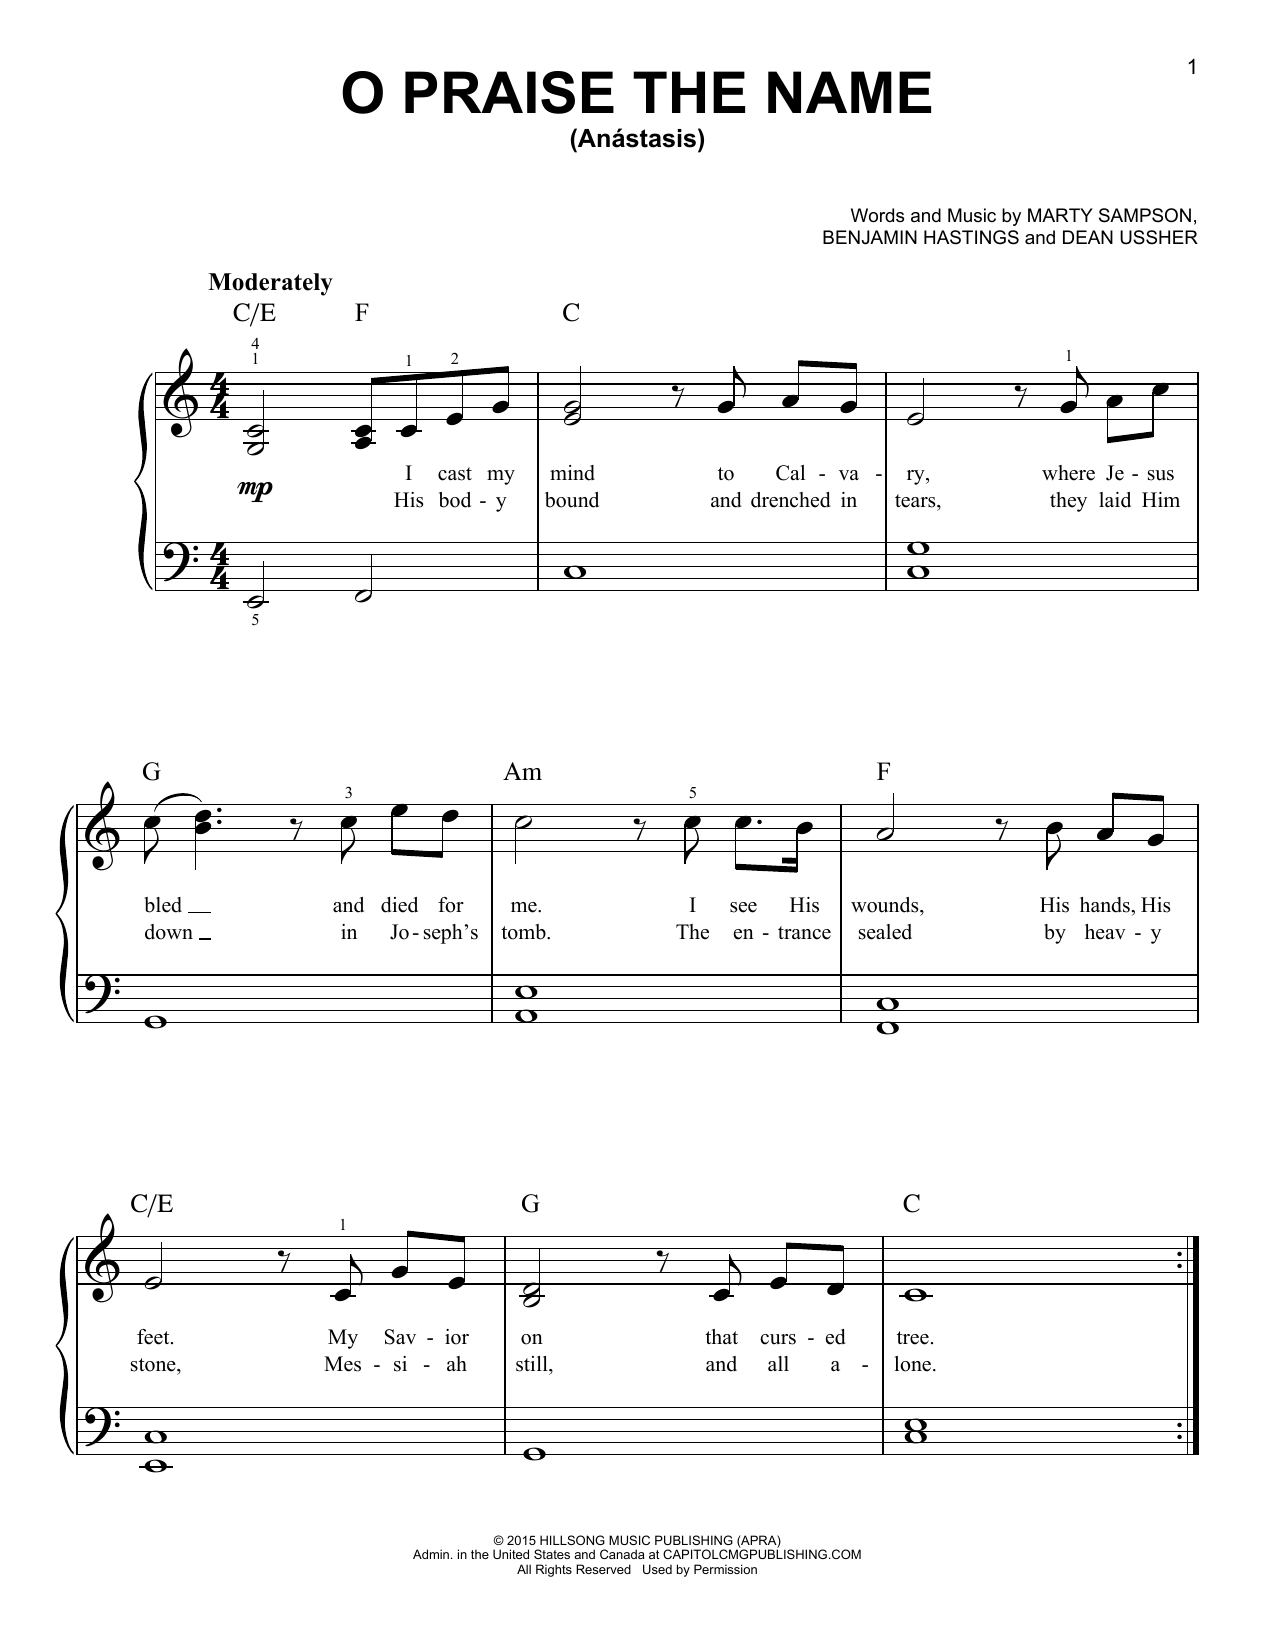 Elevation Worship O Come To The Altar Chords, Sheet Music. 